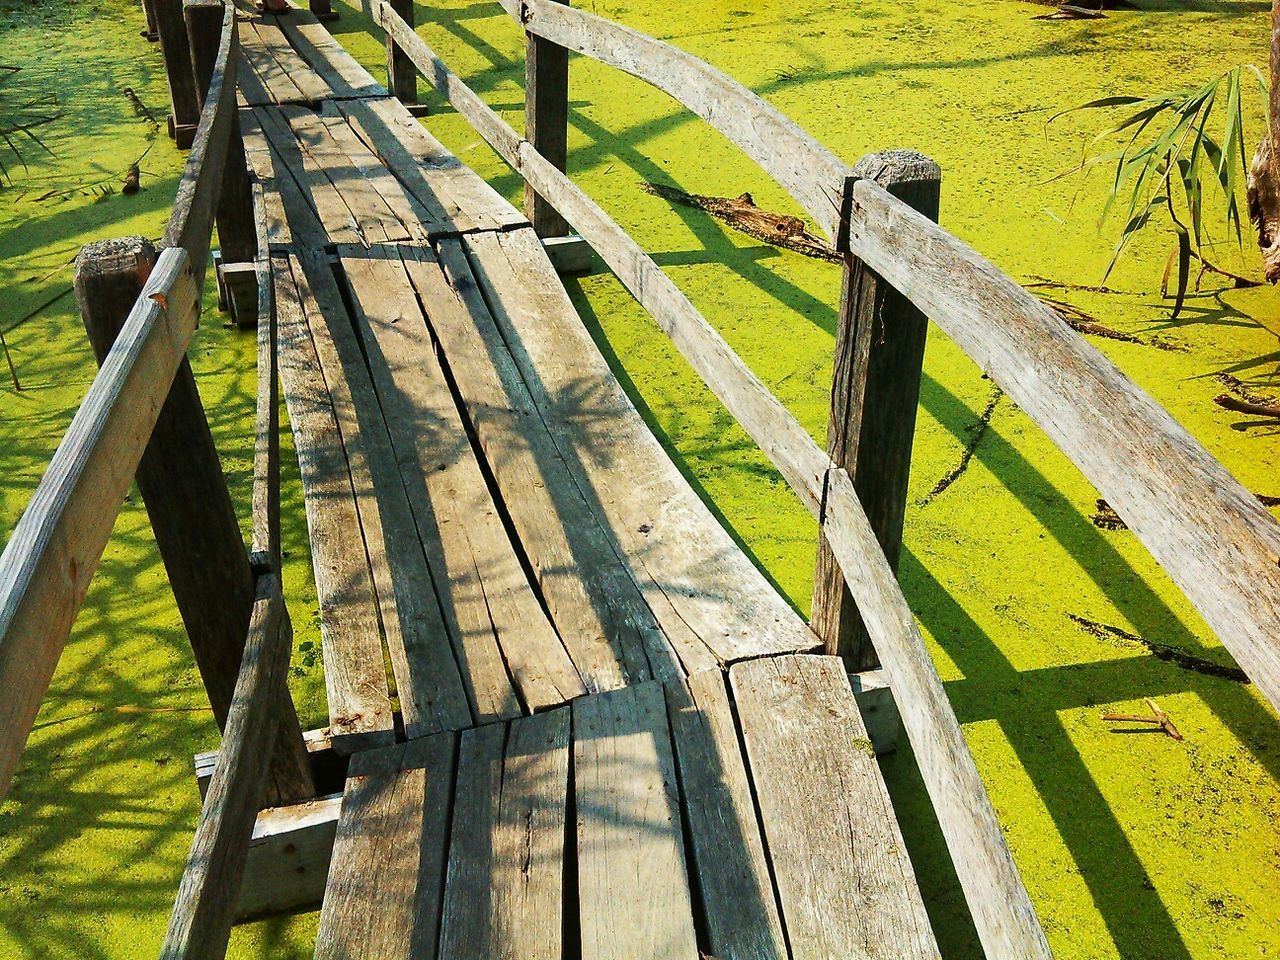 railing, grass, high angle view, field, steps, sunlight, shadow, wood - material, the way forward, fence, metal, tranquility, wooden, nature, staircase, green color, bench, day, no people, park - man made space